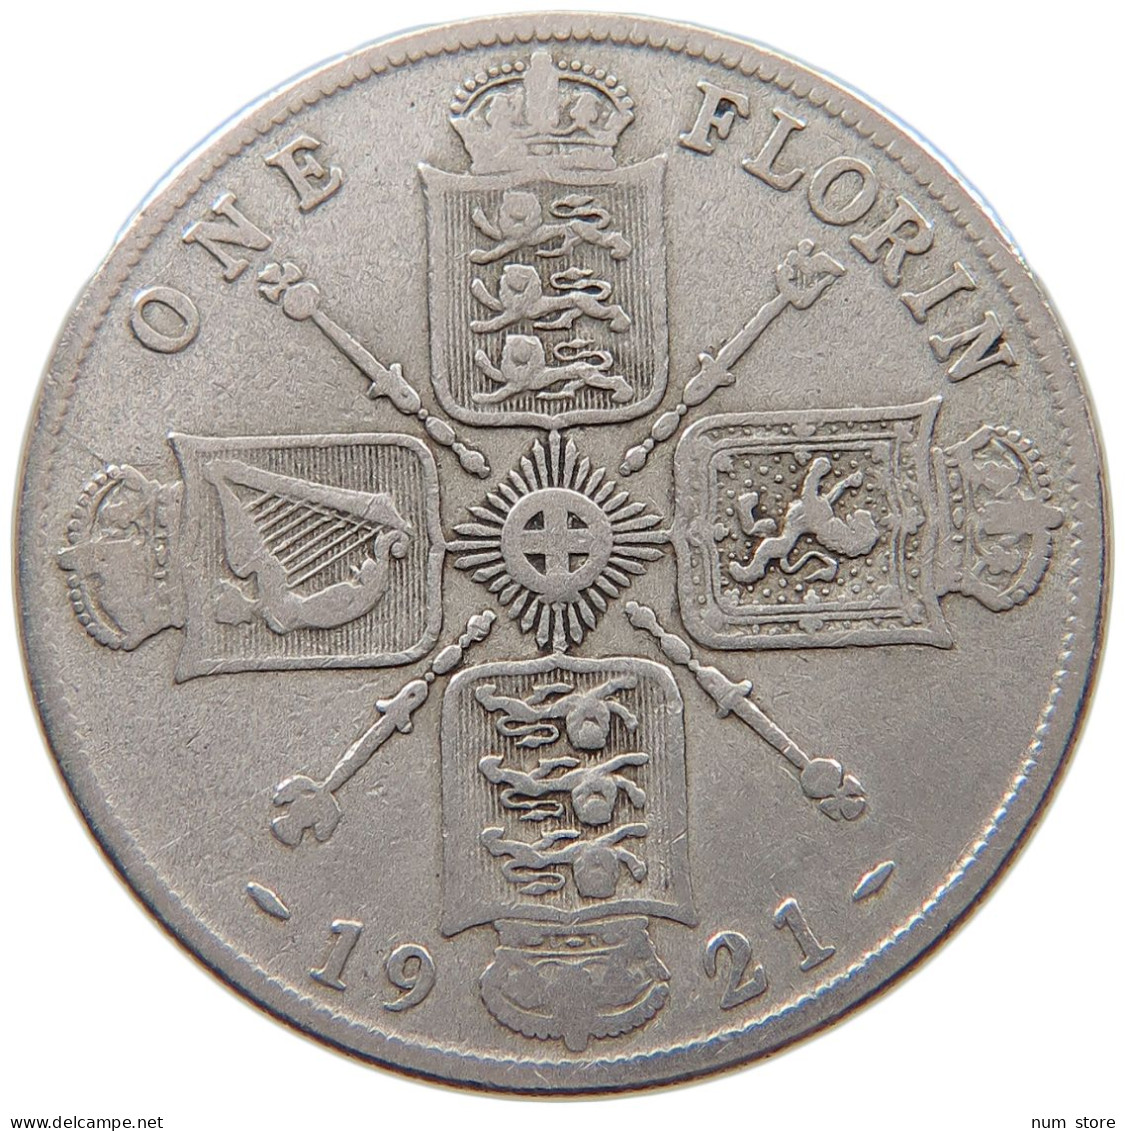 GREAT BRITAIN FLORIN 1921 George V. (1910-1936) #a057 0585 - J. 1 Florin / 2 Schillings